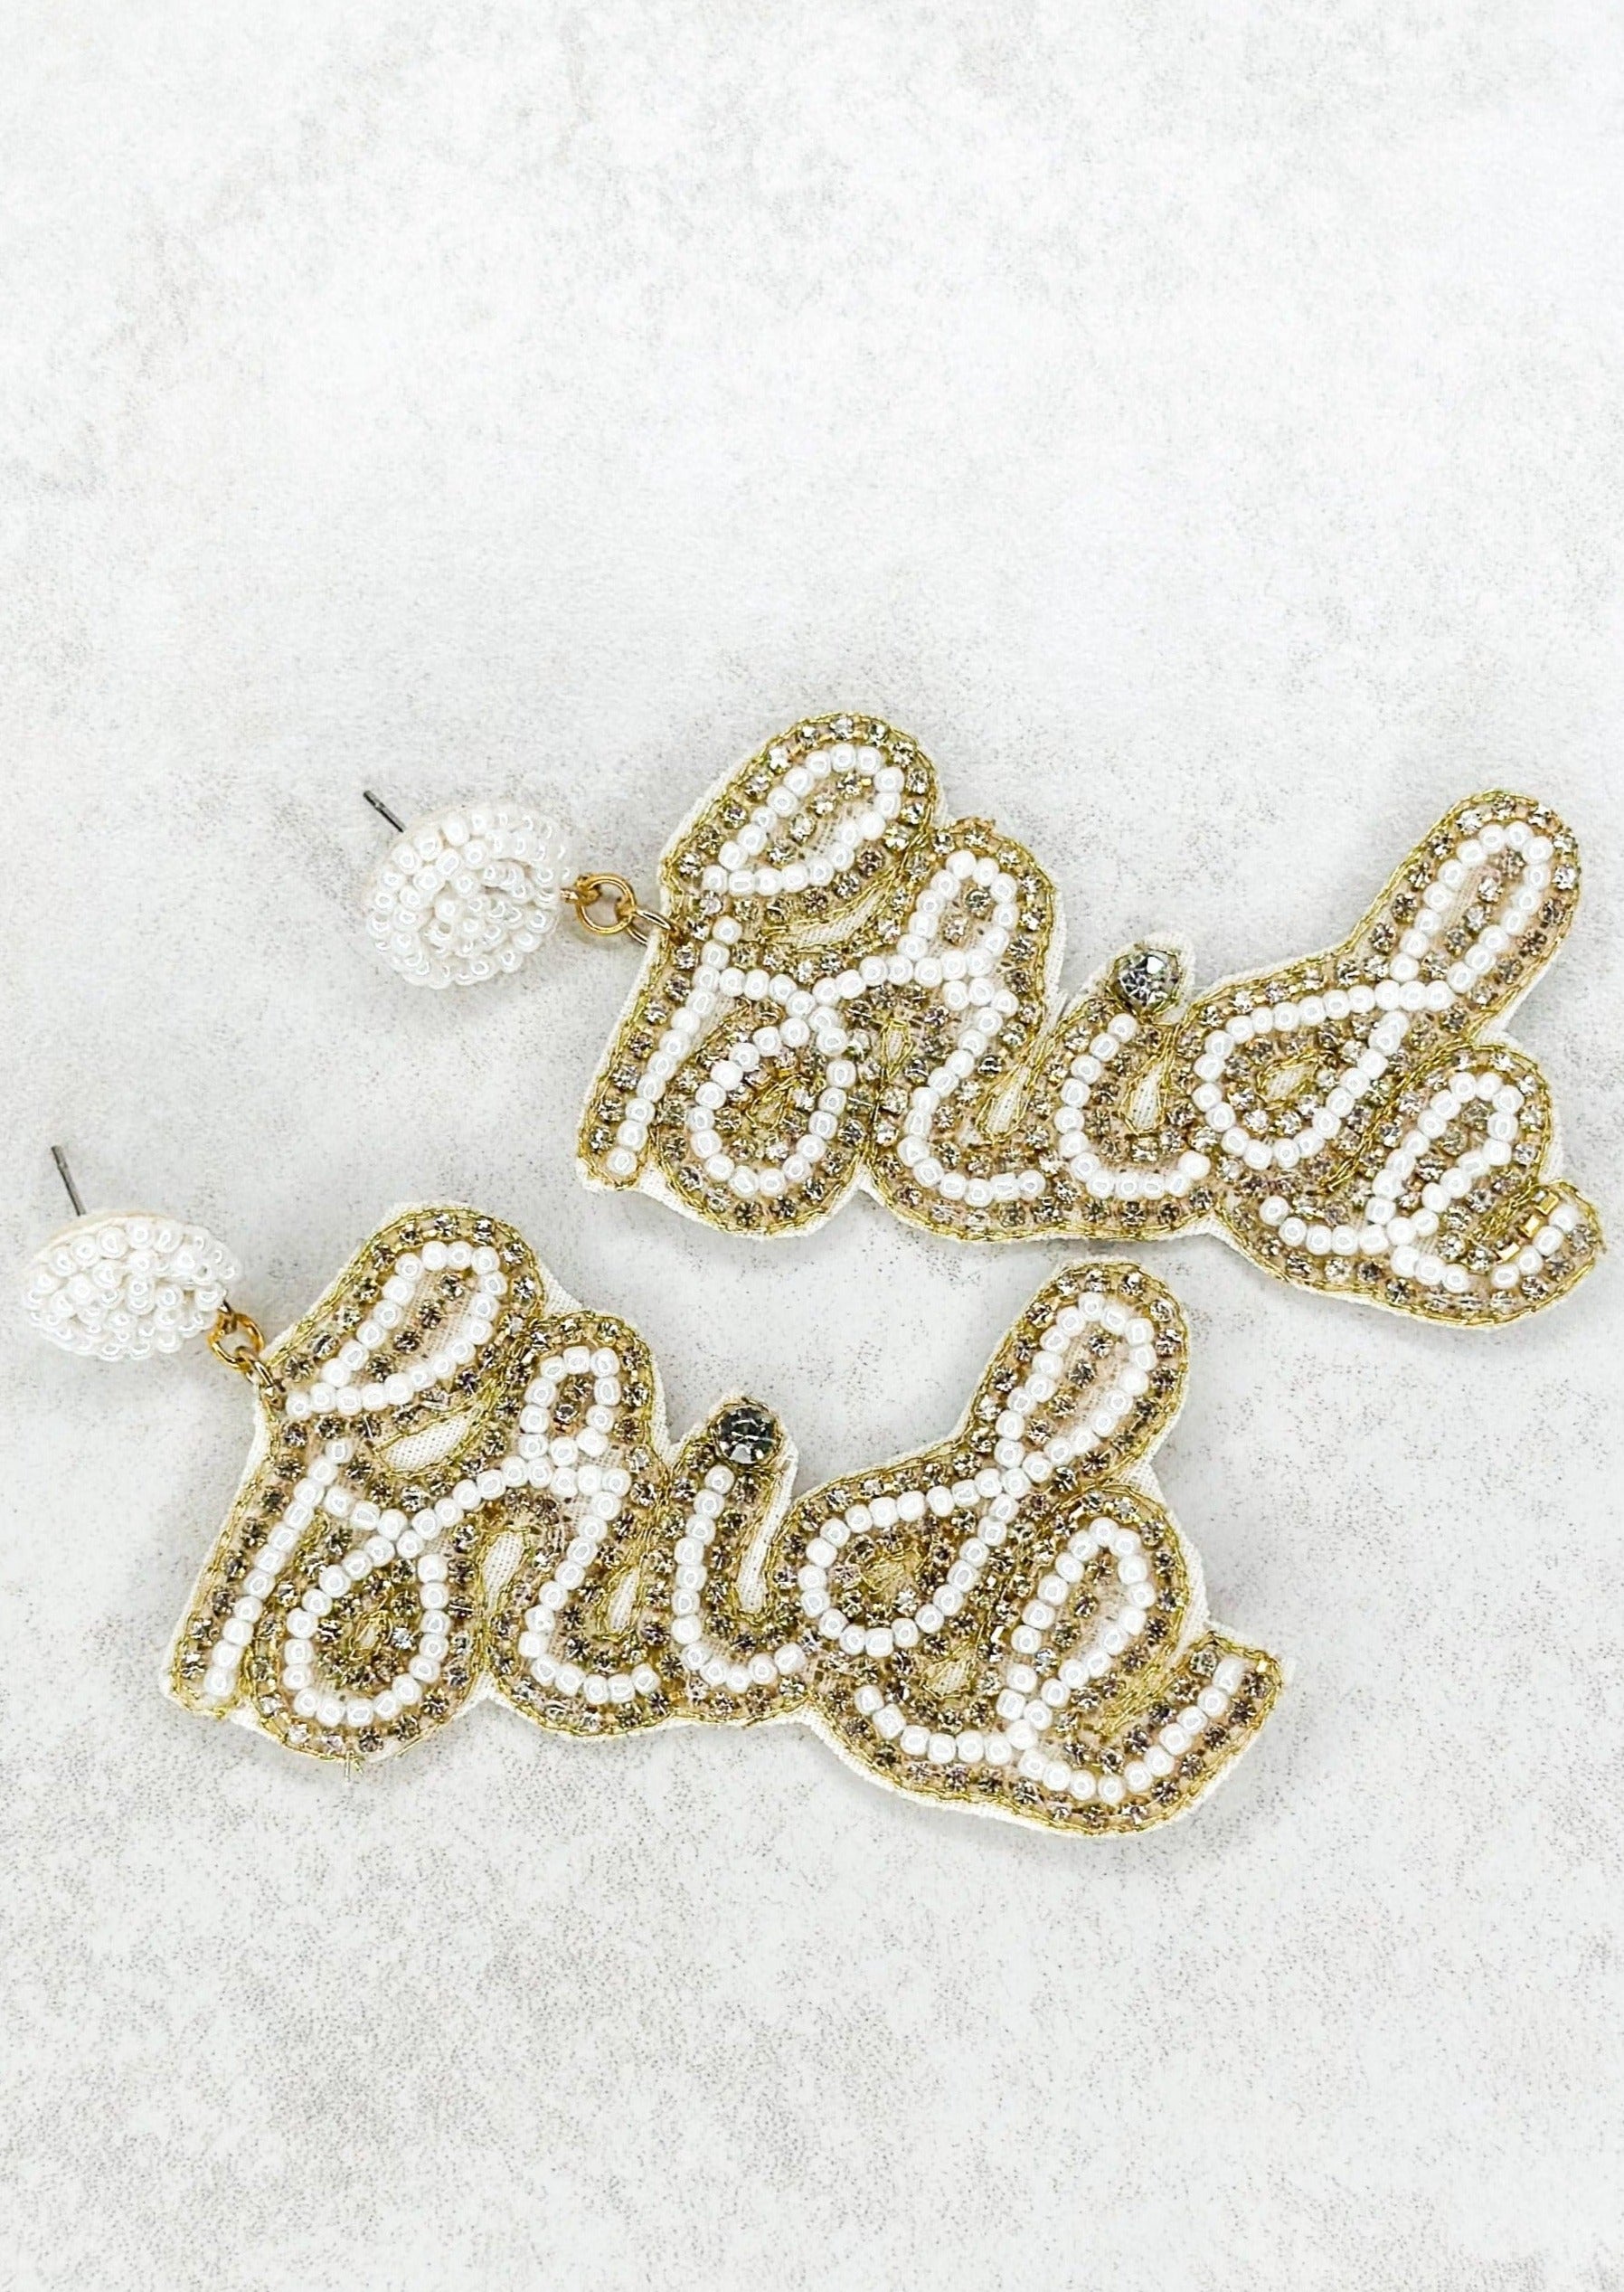 Bride seed bead post back earrings, cursive written bride in white seed beads outlined in gold beads